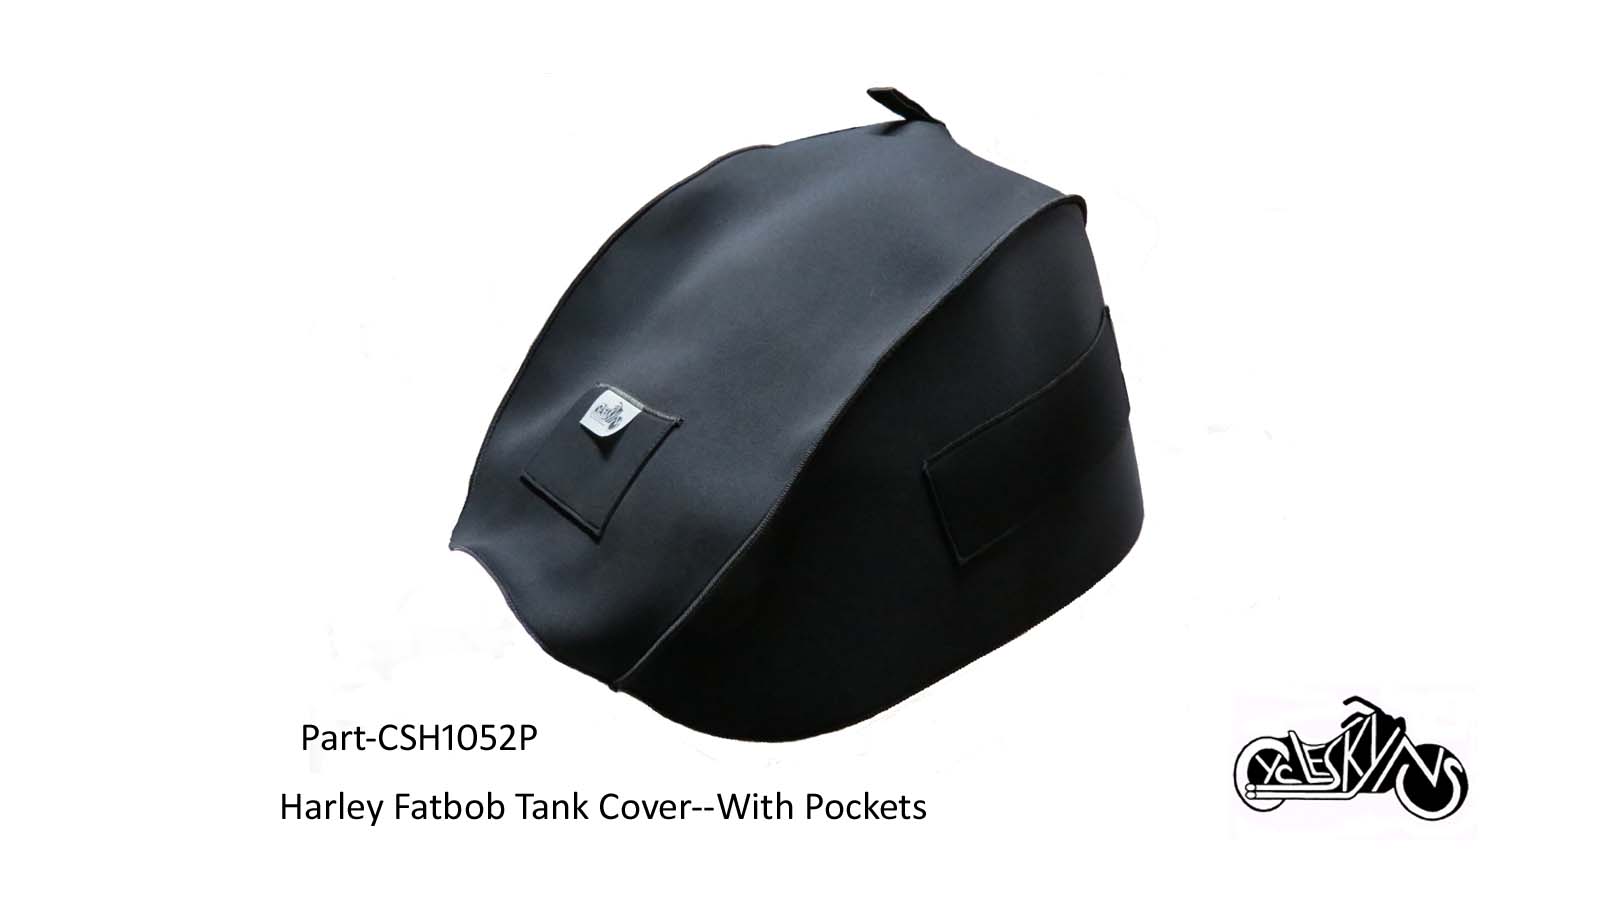 Neoprene Protective mechanic's Cover designed for the large Fat-bob Harley Davidson gas tank. This cover has 1 top and 2 side pockets.